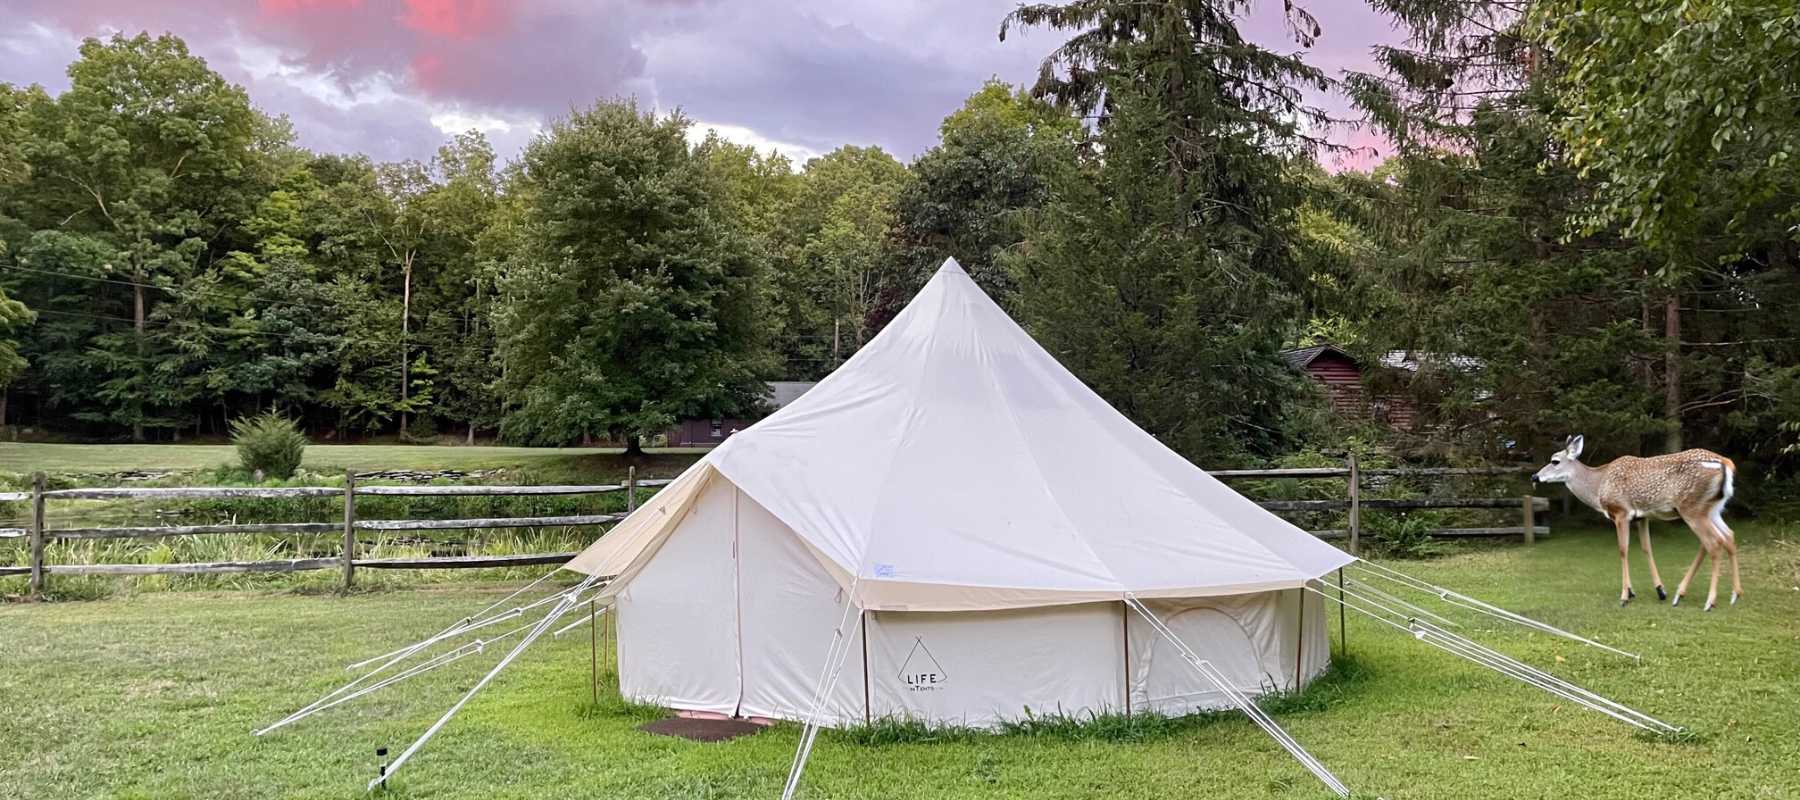 16 ft bell tent with a deer